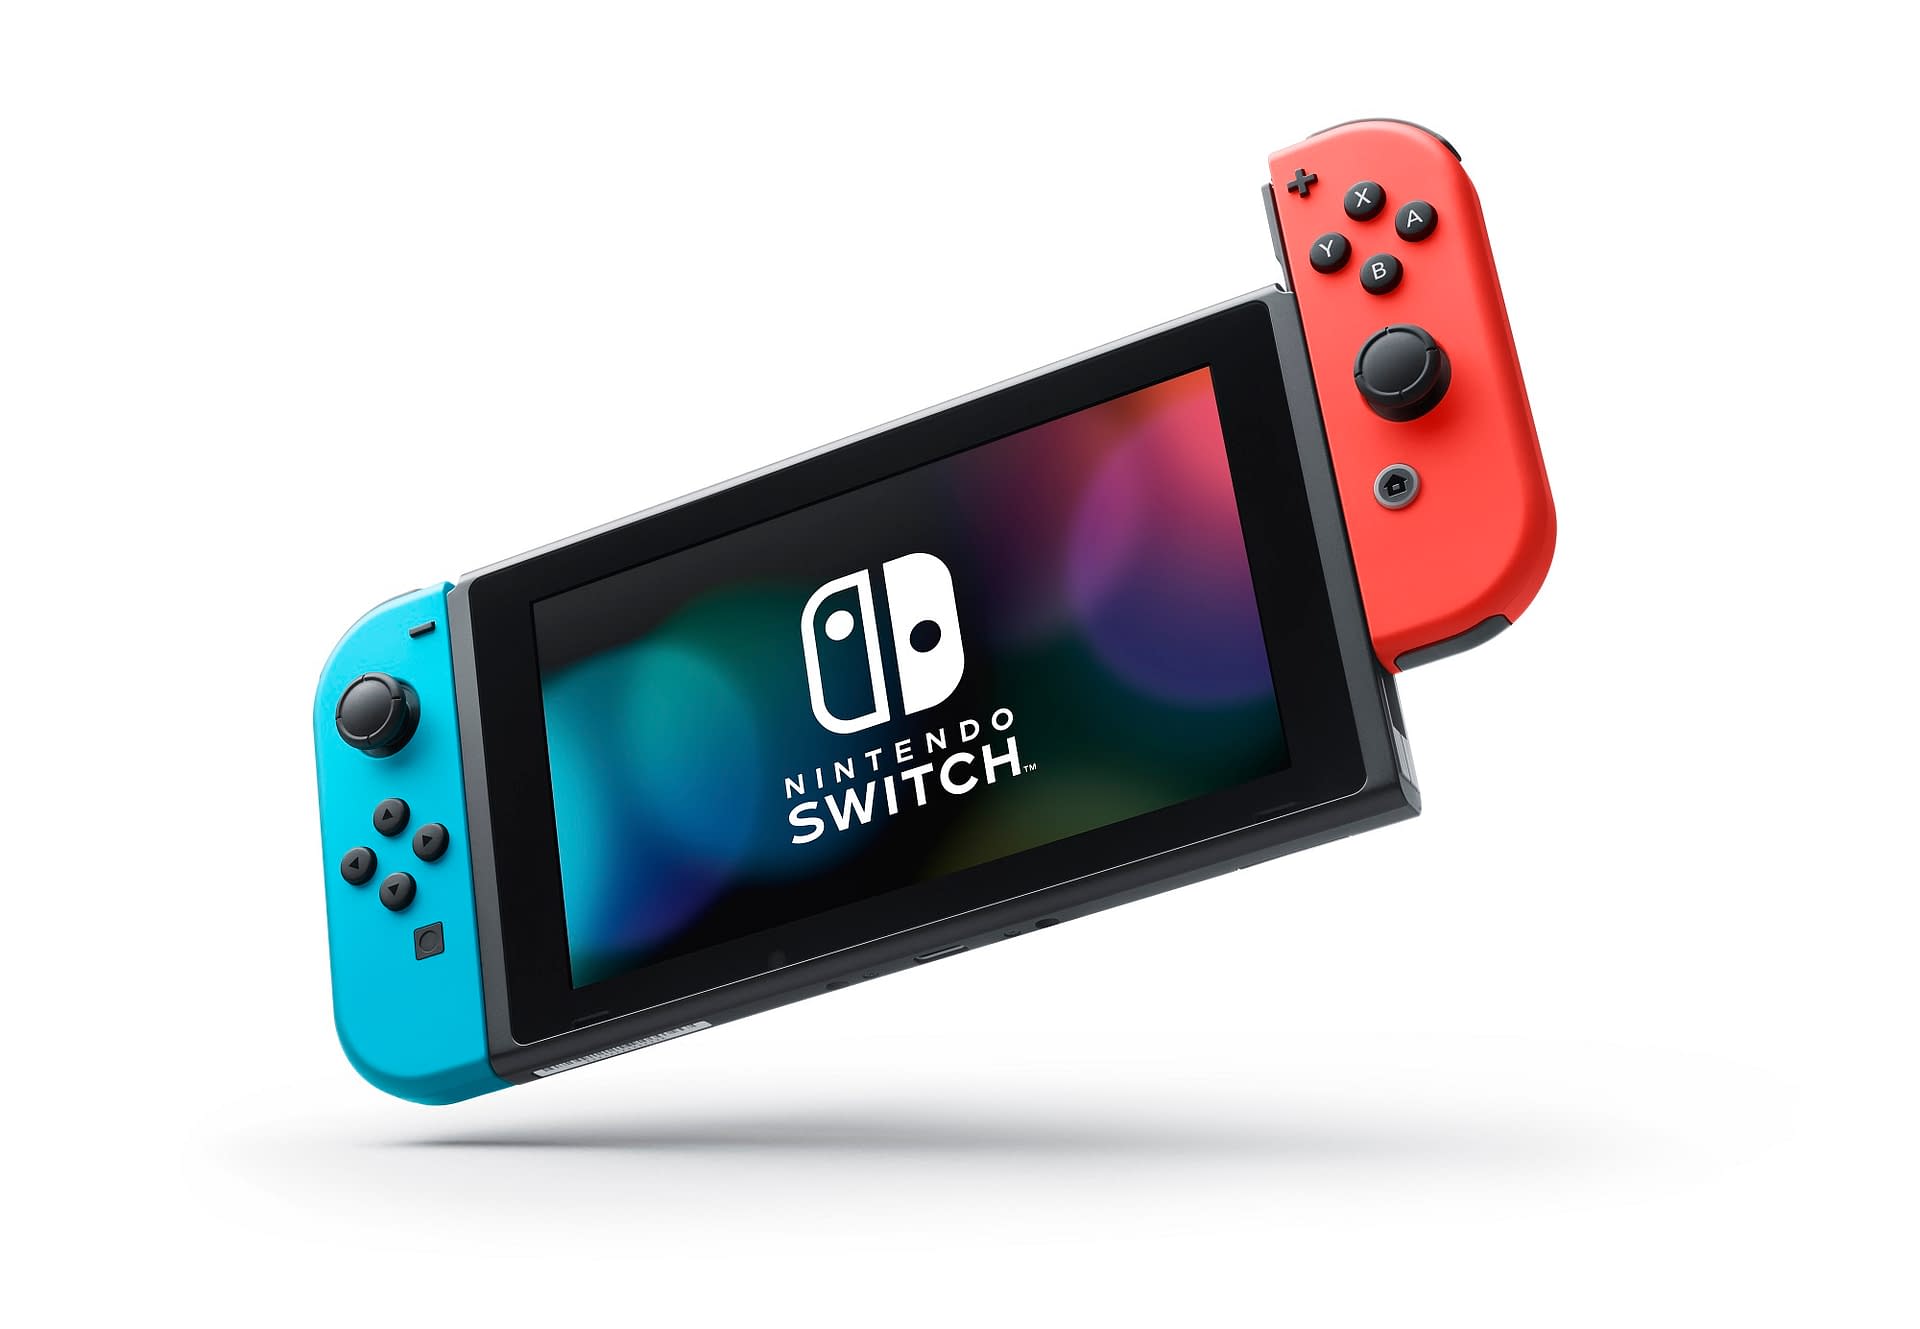 which is the latest nintendo switch